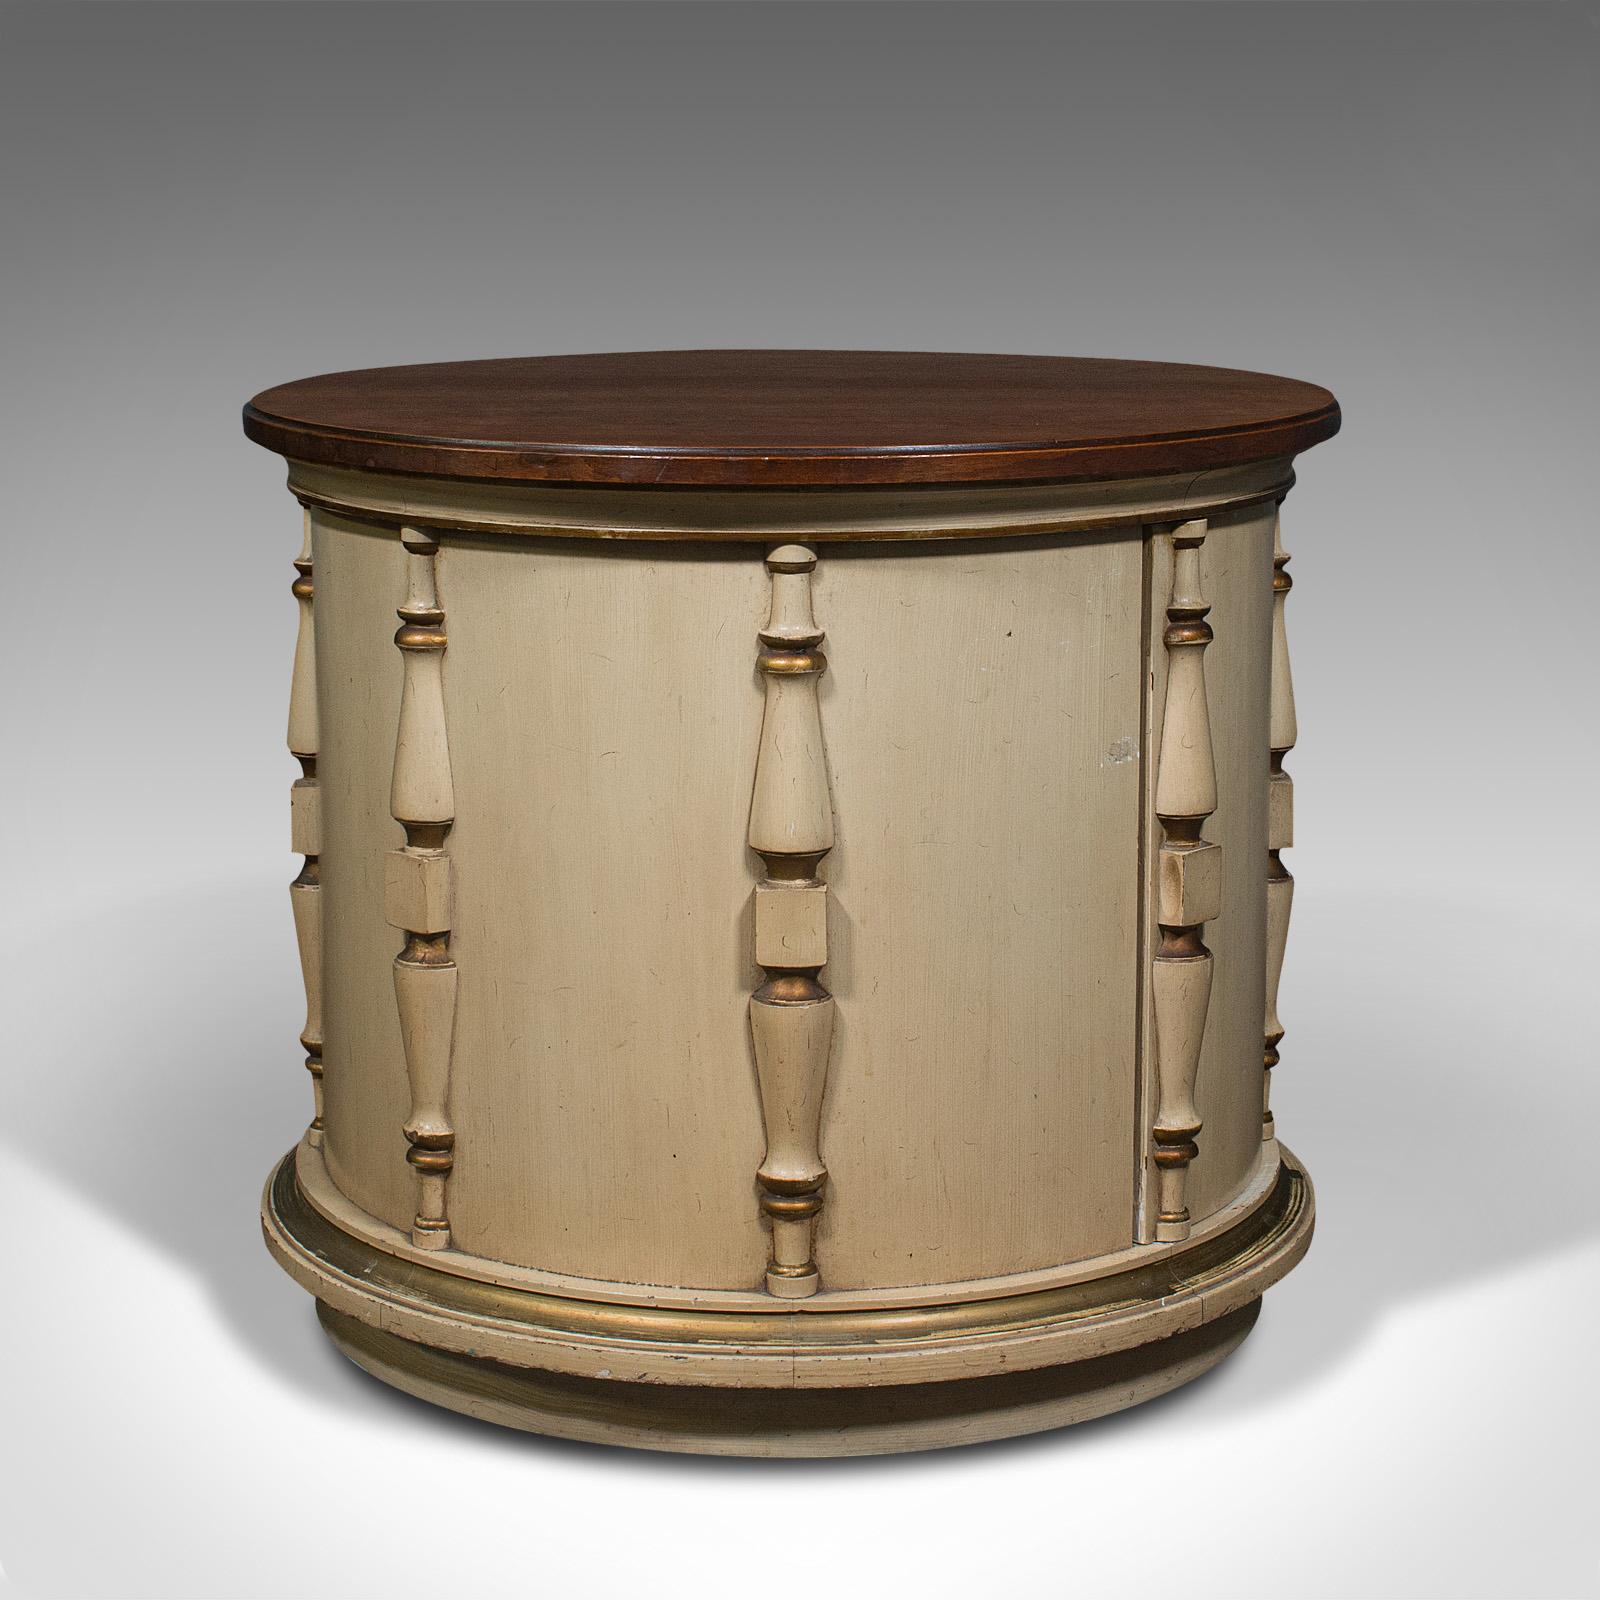 British Vintage Drum Table, English, Occasional, Coffee, Cabinet, Late 20th Century